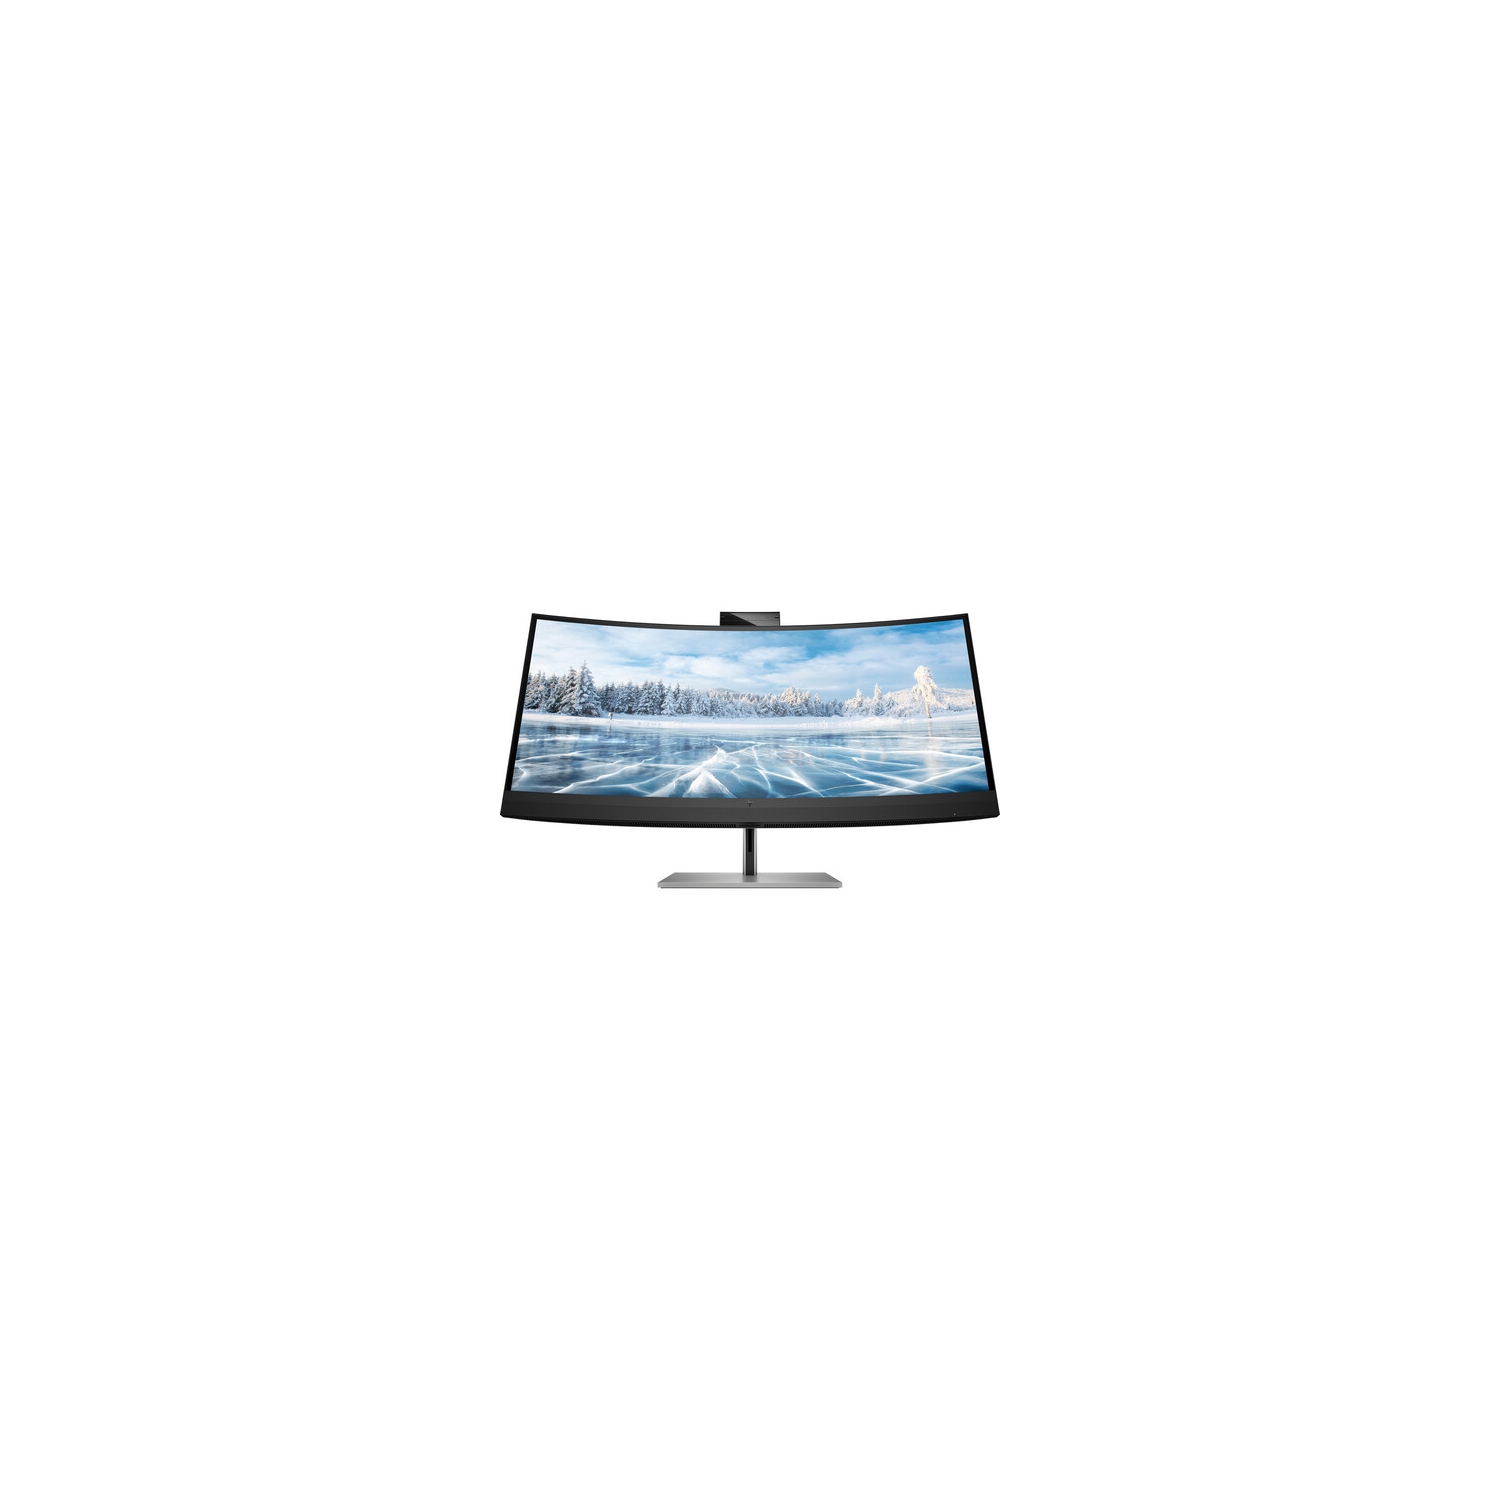 HP 34" WQHD 60Hz 6ms GTG Curved IPS LCD Monitor (30A19AA#ABA) - Black and Silver